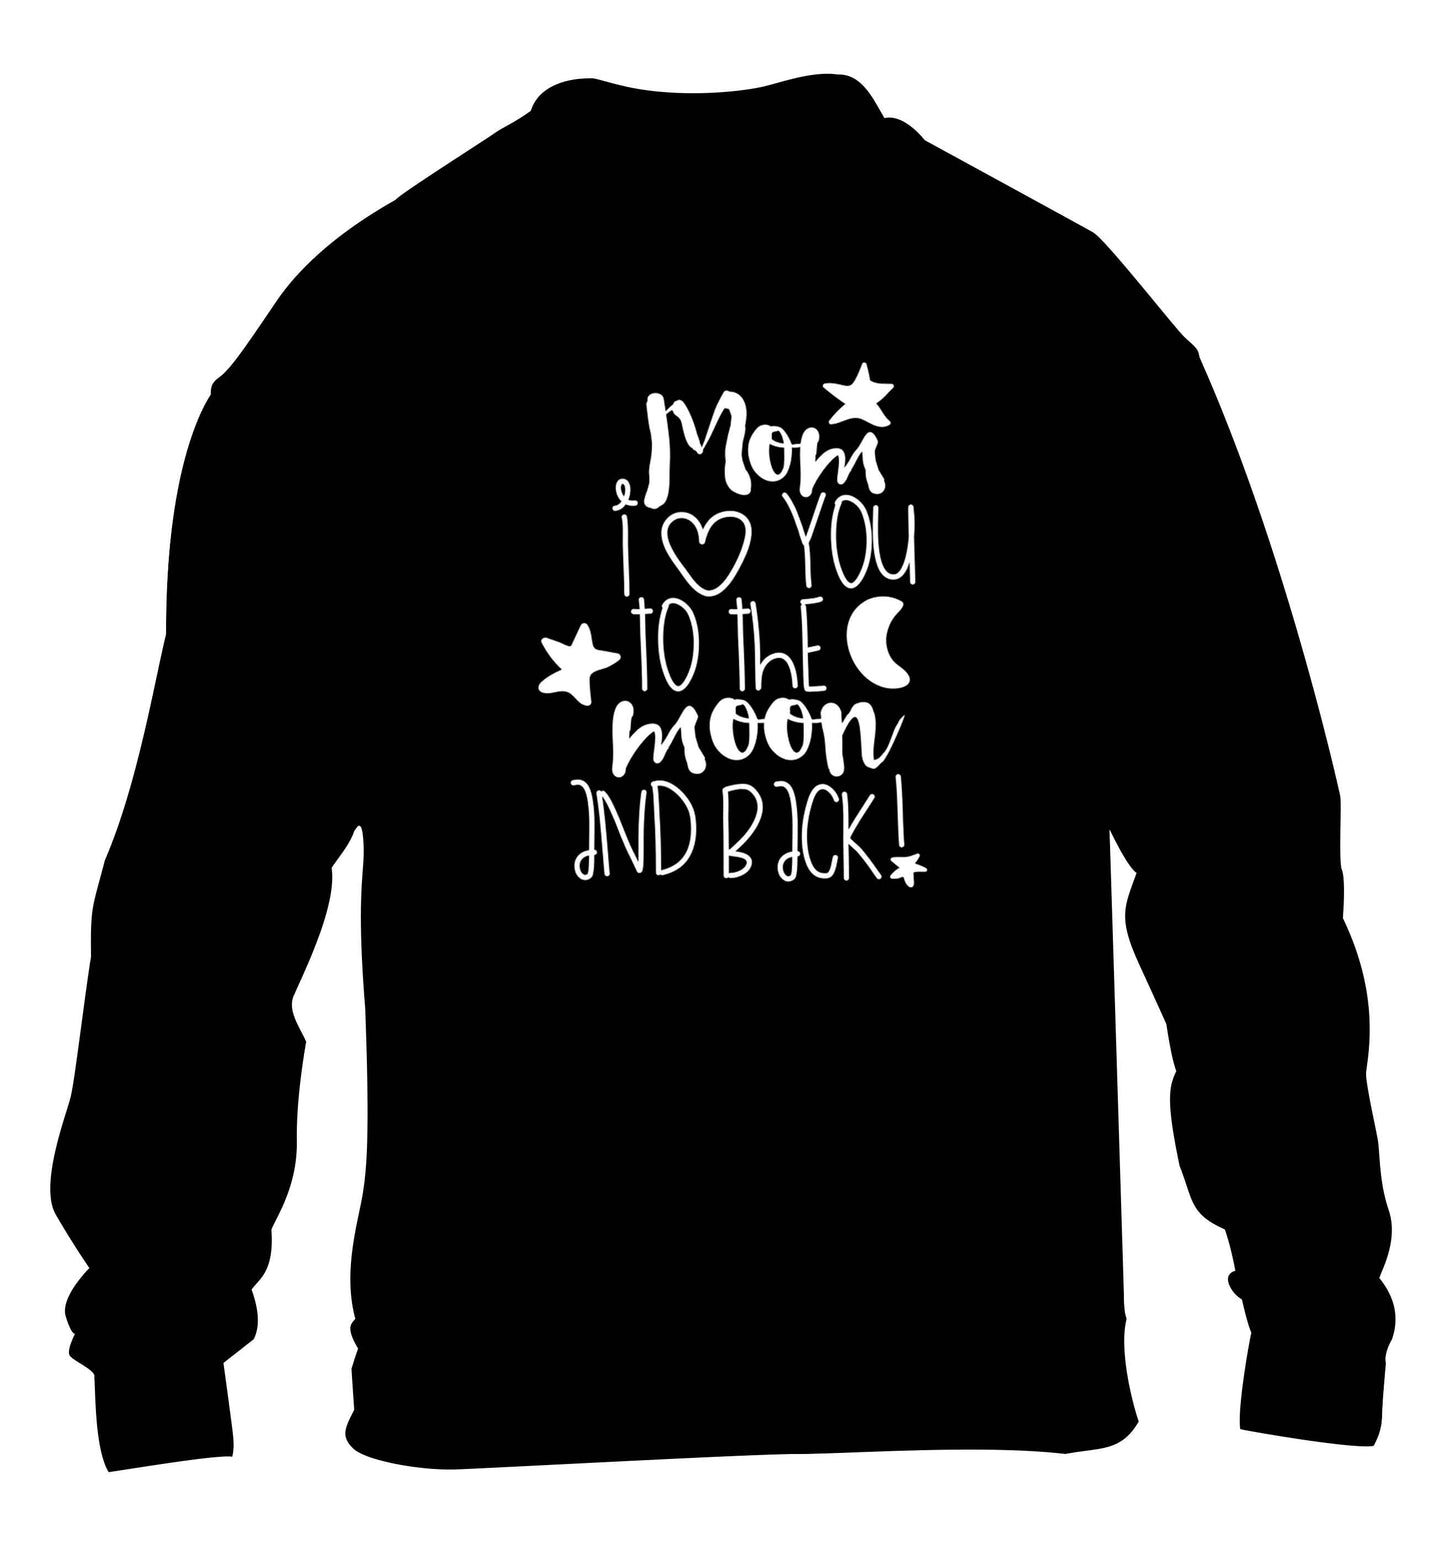 Mom I love you to the moon and back children's black sweater 12-13 Years